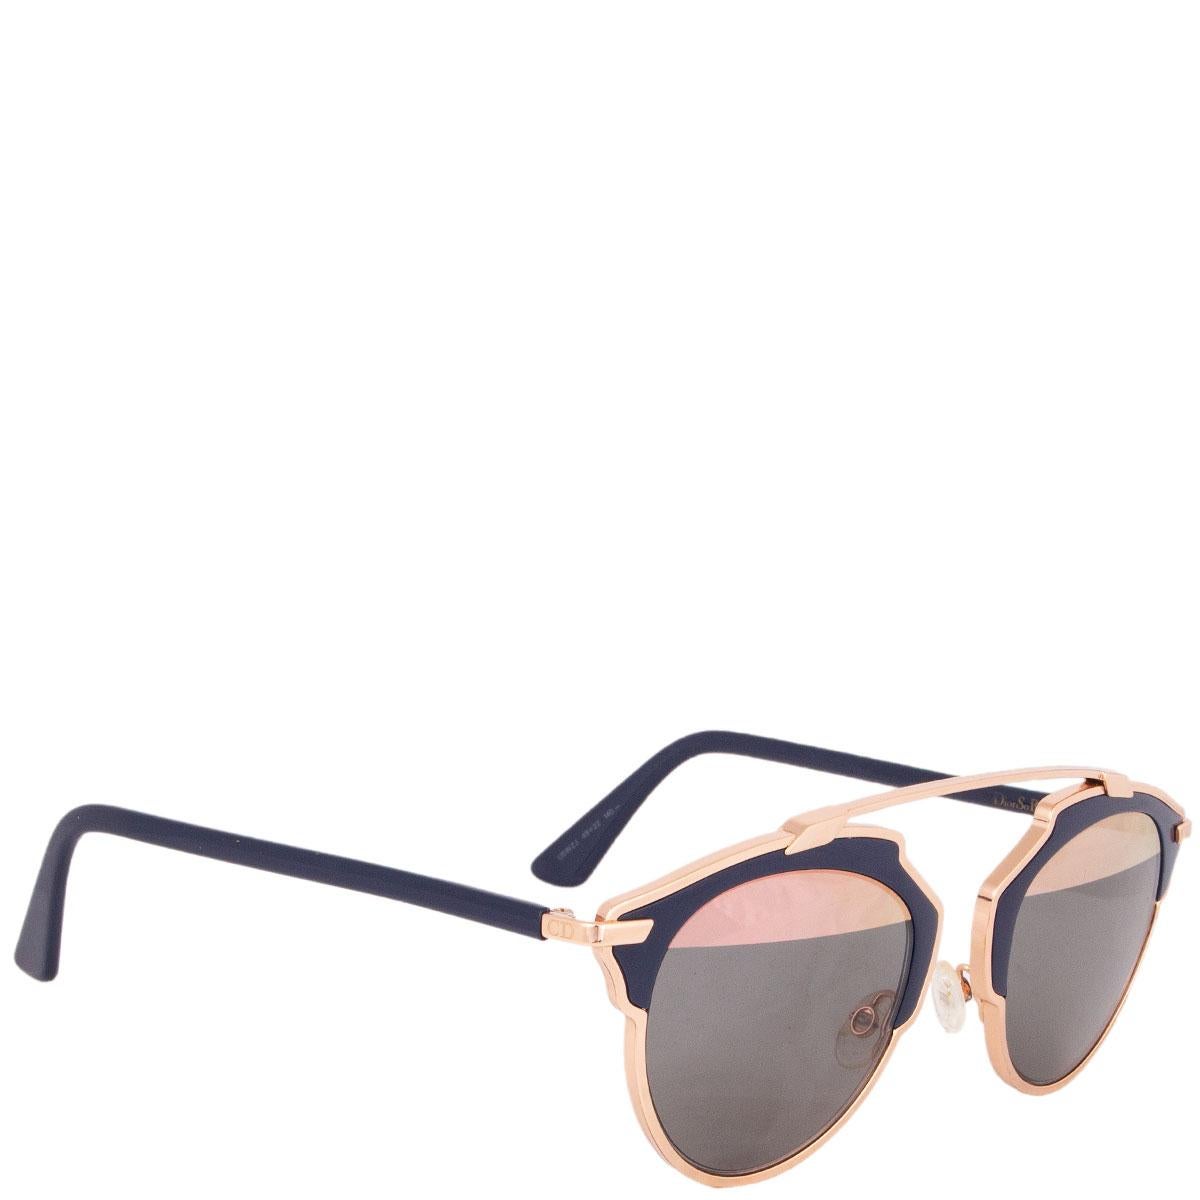 100% authentic Christian Dior 'So Real' sunglasses with rose gold metal and blue acetate frame. Mirrored pink and blue lenses. Have been worn with a small scratch on the left lens. Overall in excellent condition. Come with case.

Model	U5WZJ 48-22